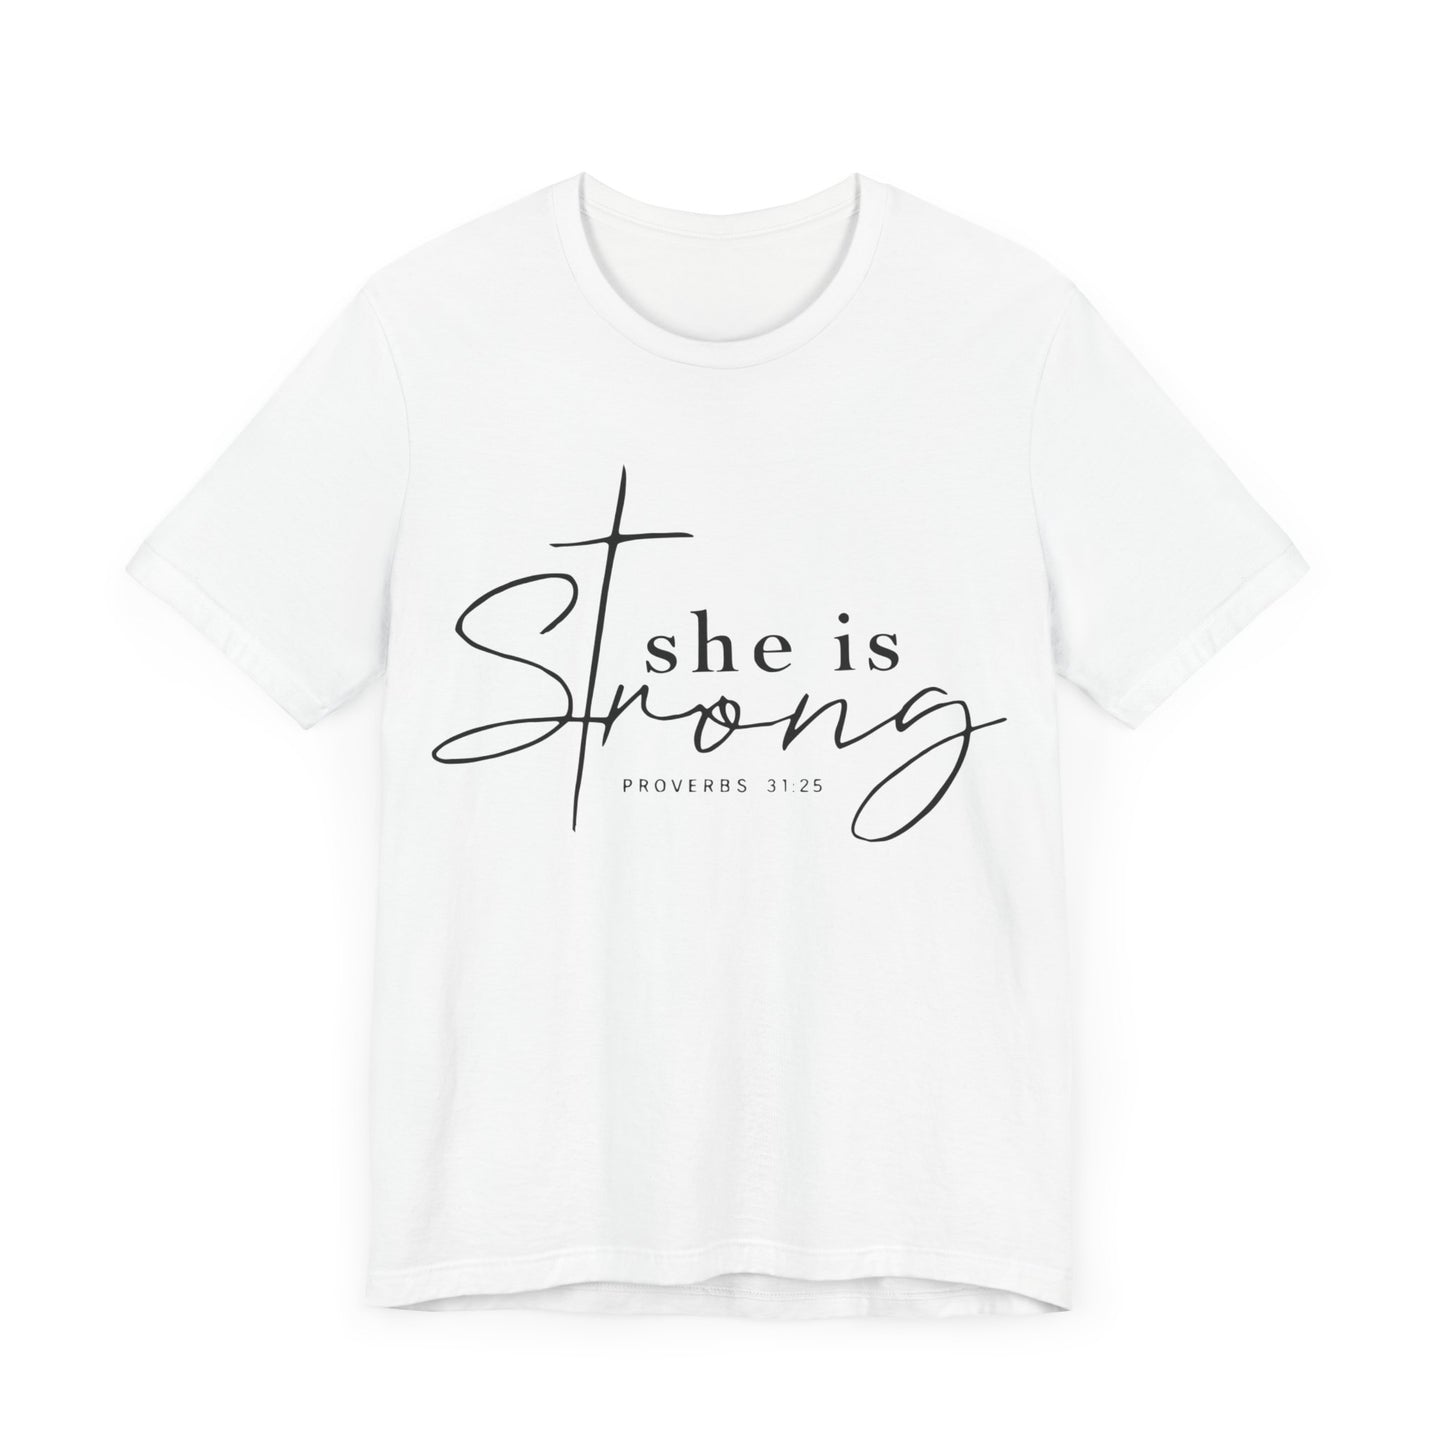 "Proverbs 31:25 Women's T-Shirt with Tall Cross in Text"